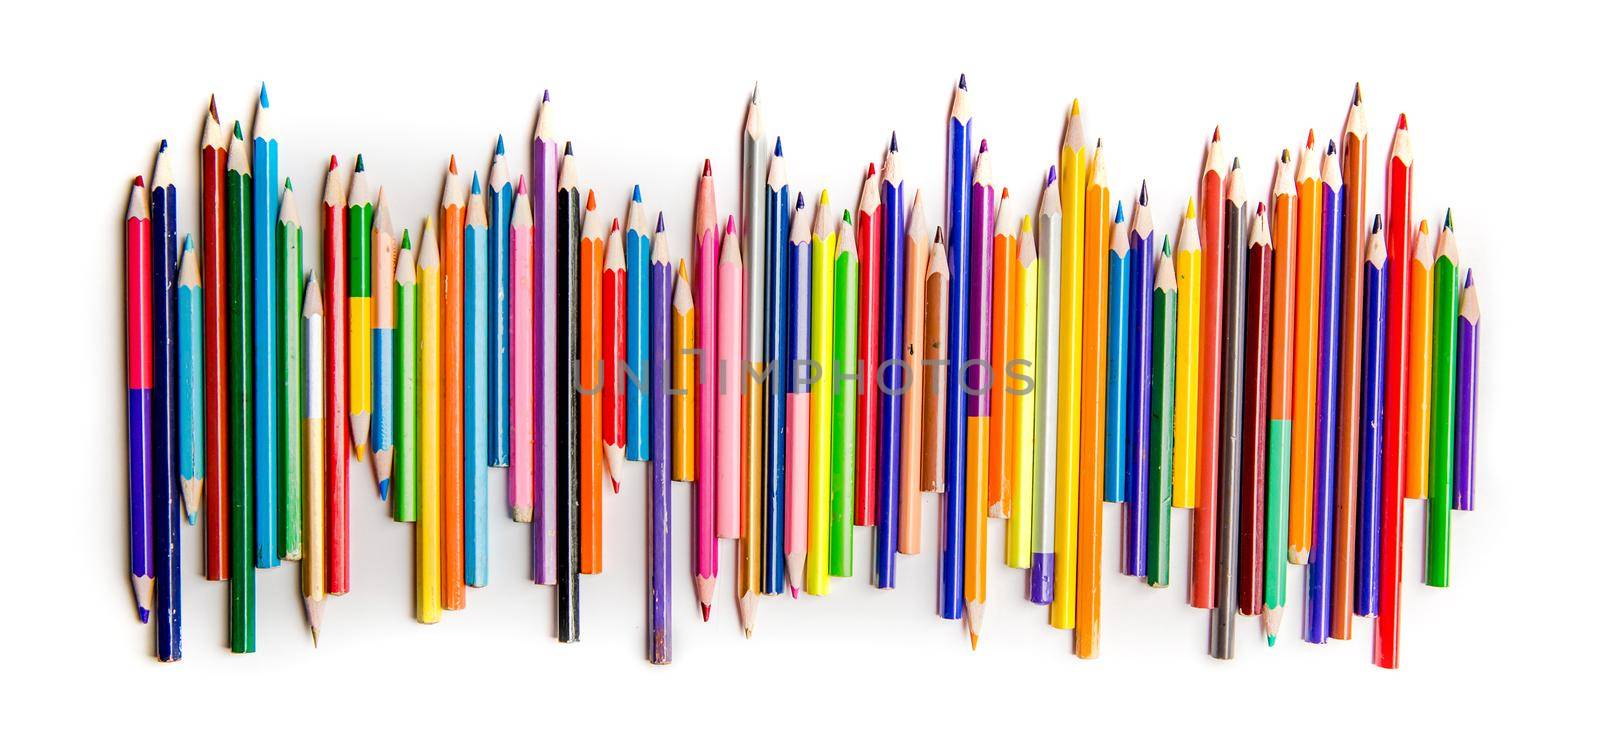 Top view of bright color pencils placed in a row isolated on white background